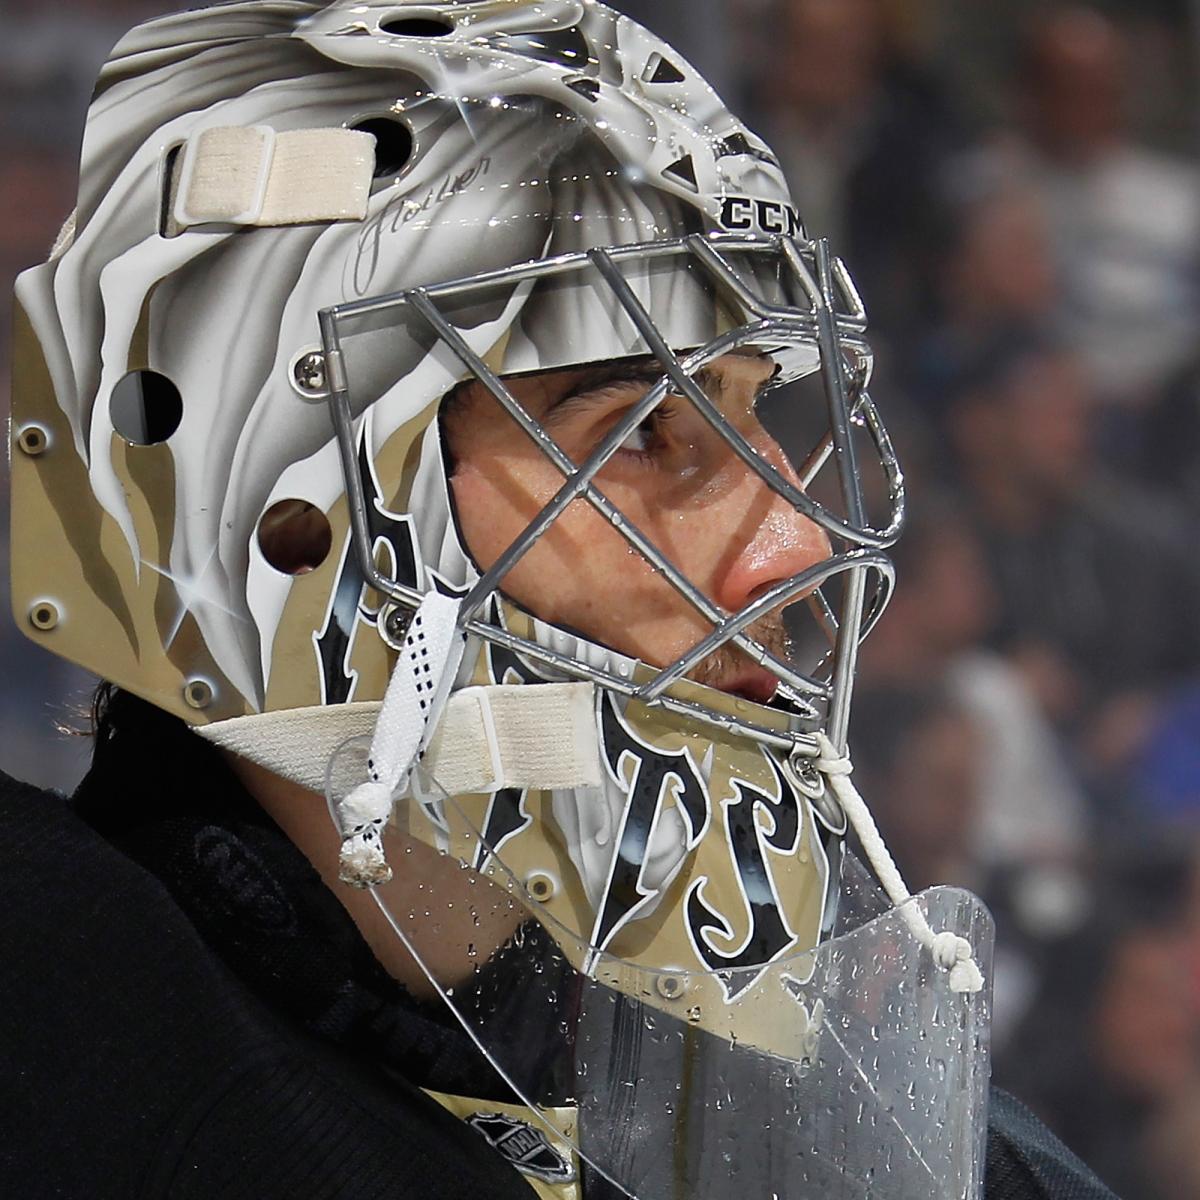 Penguins have tough time after Fleury makes first appearance in